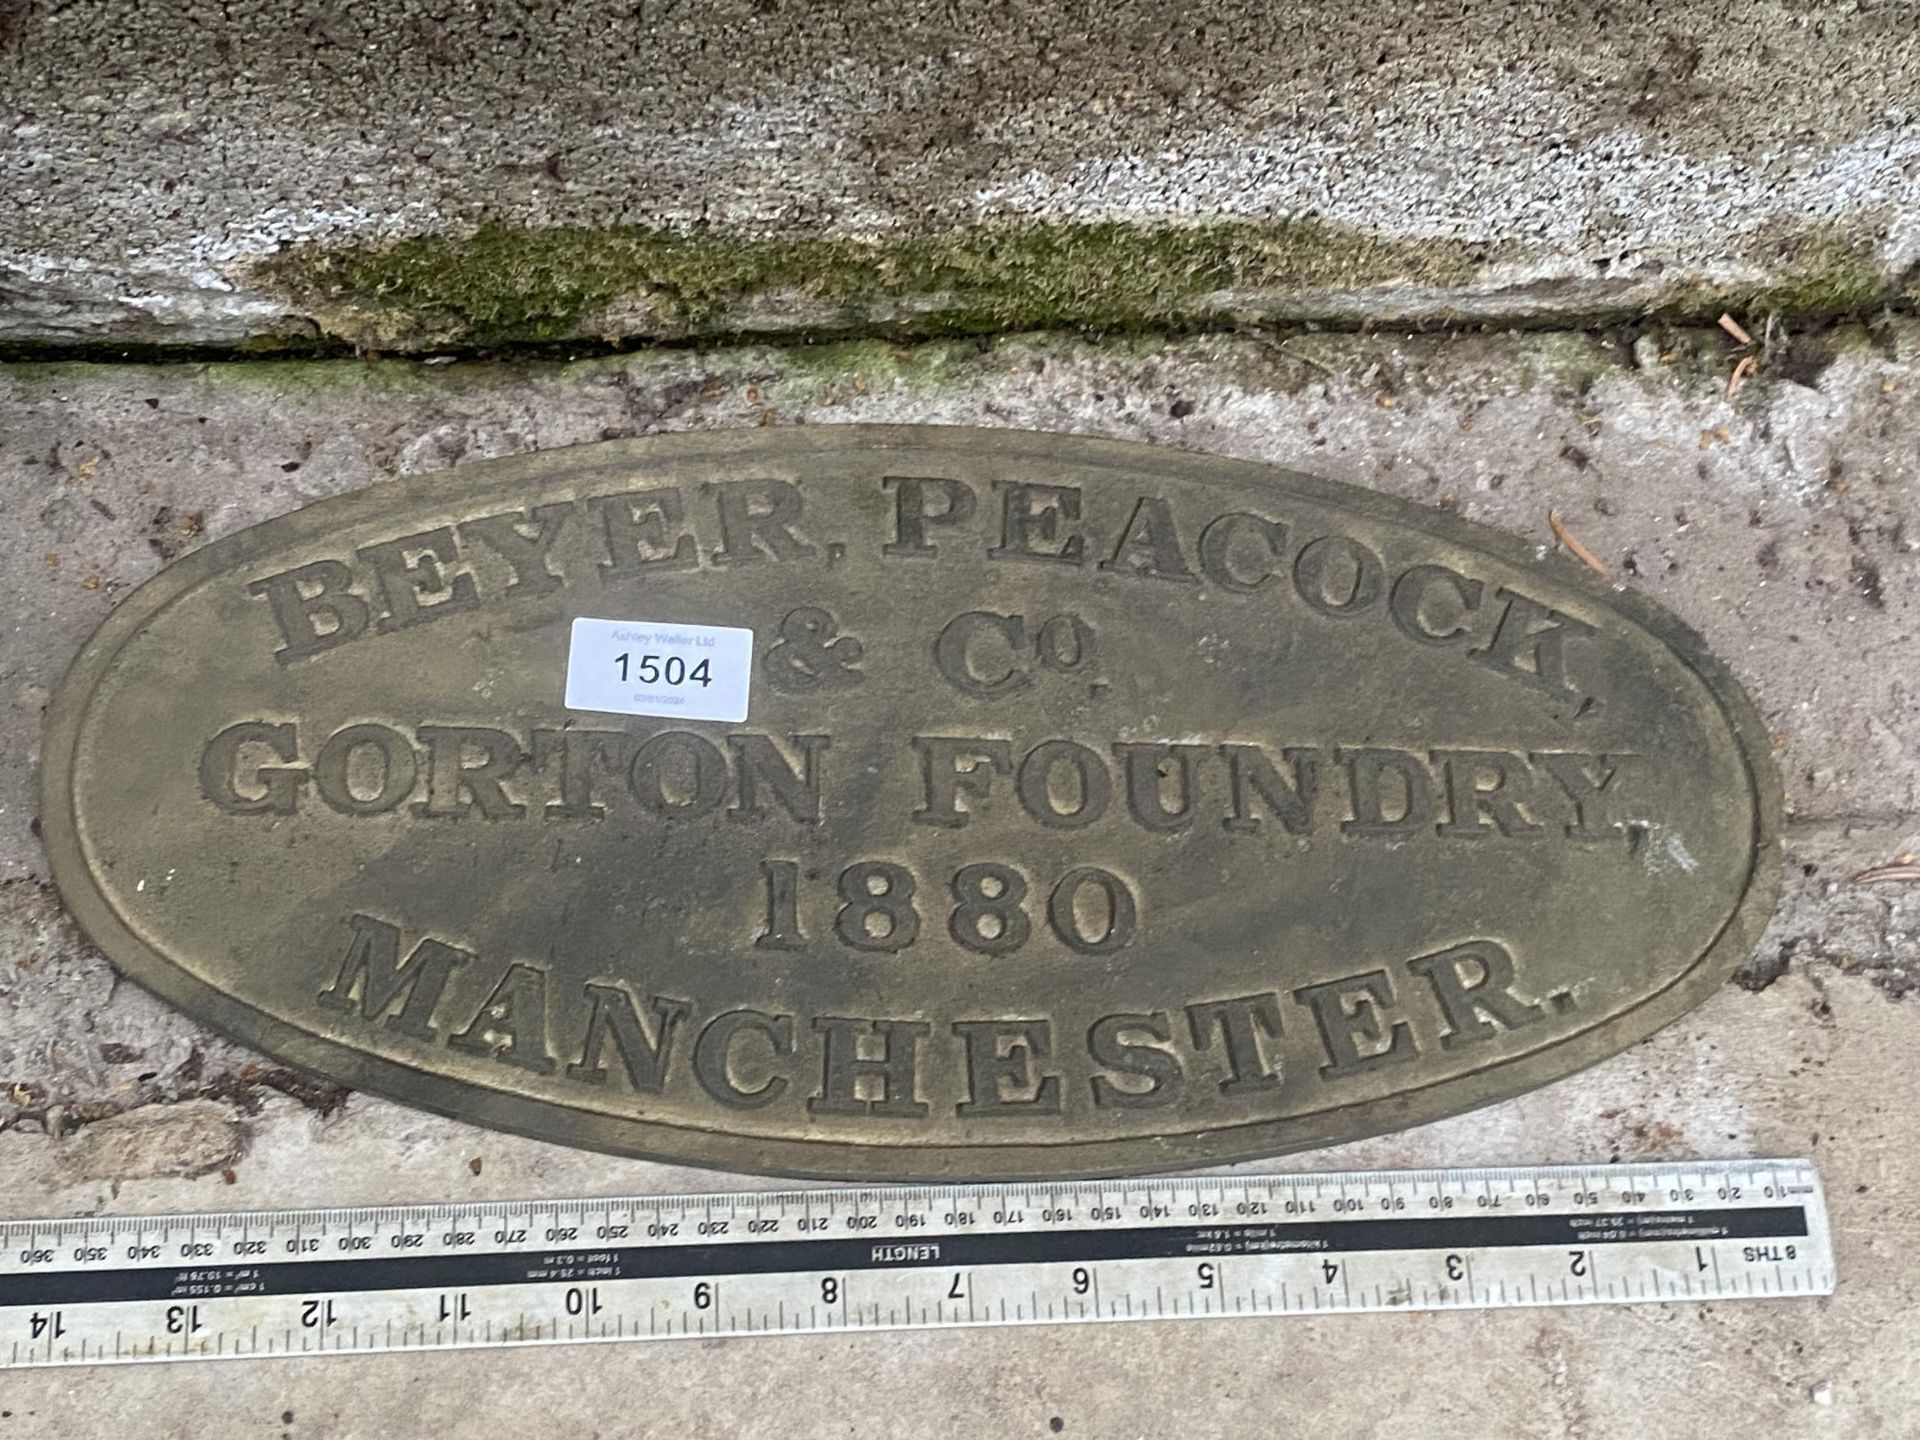 AN OVAL BRASS 'BEYER, PEACOCK & CO GORTON FOUNDRY' PLAQUE